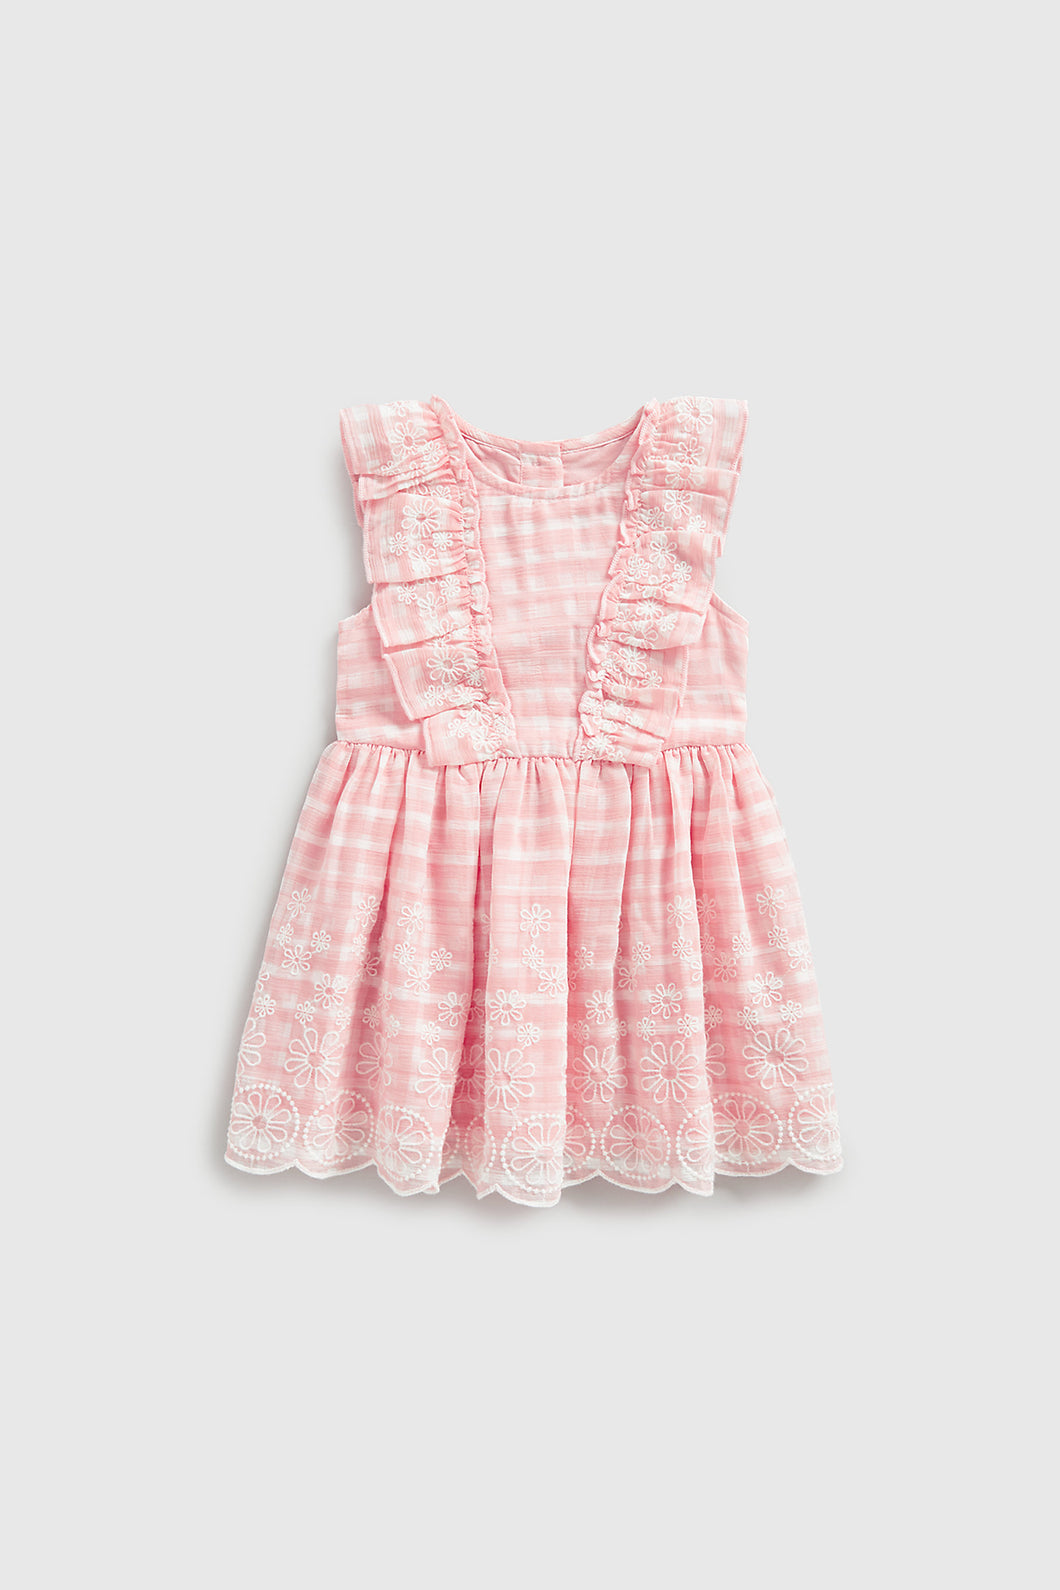 Mothercare Pink Gingham Dress